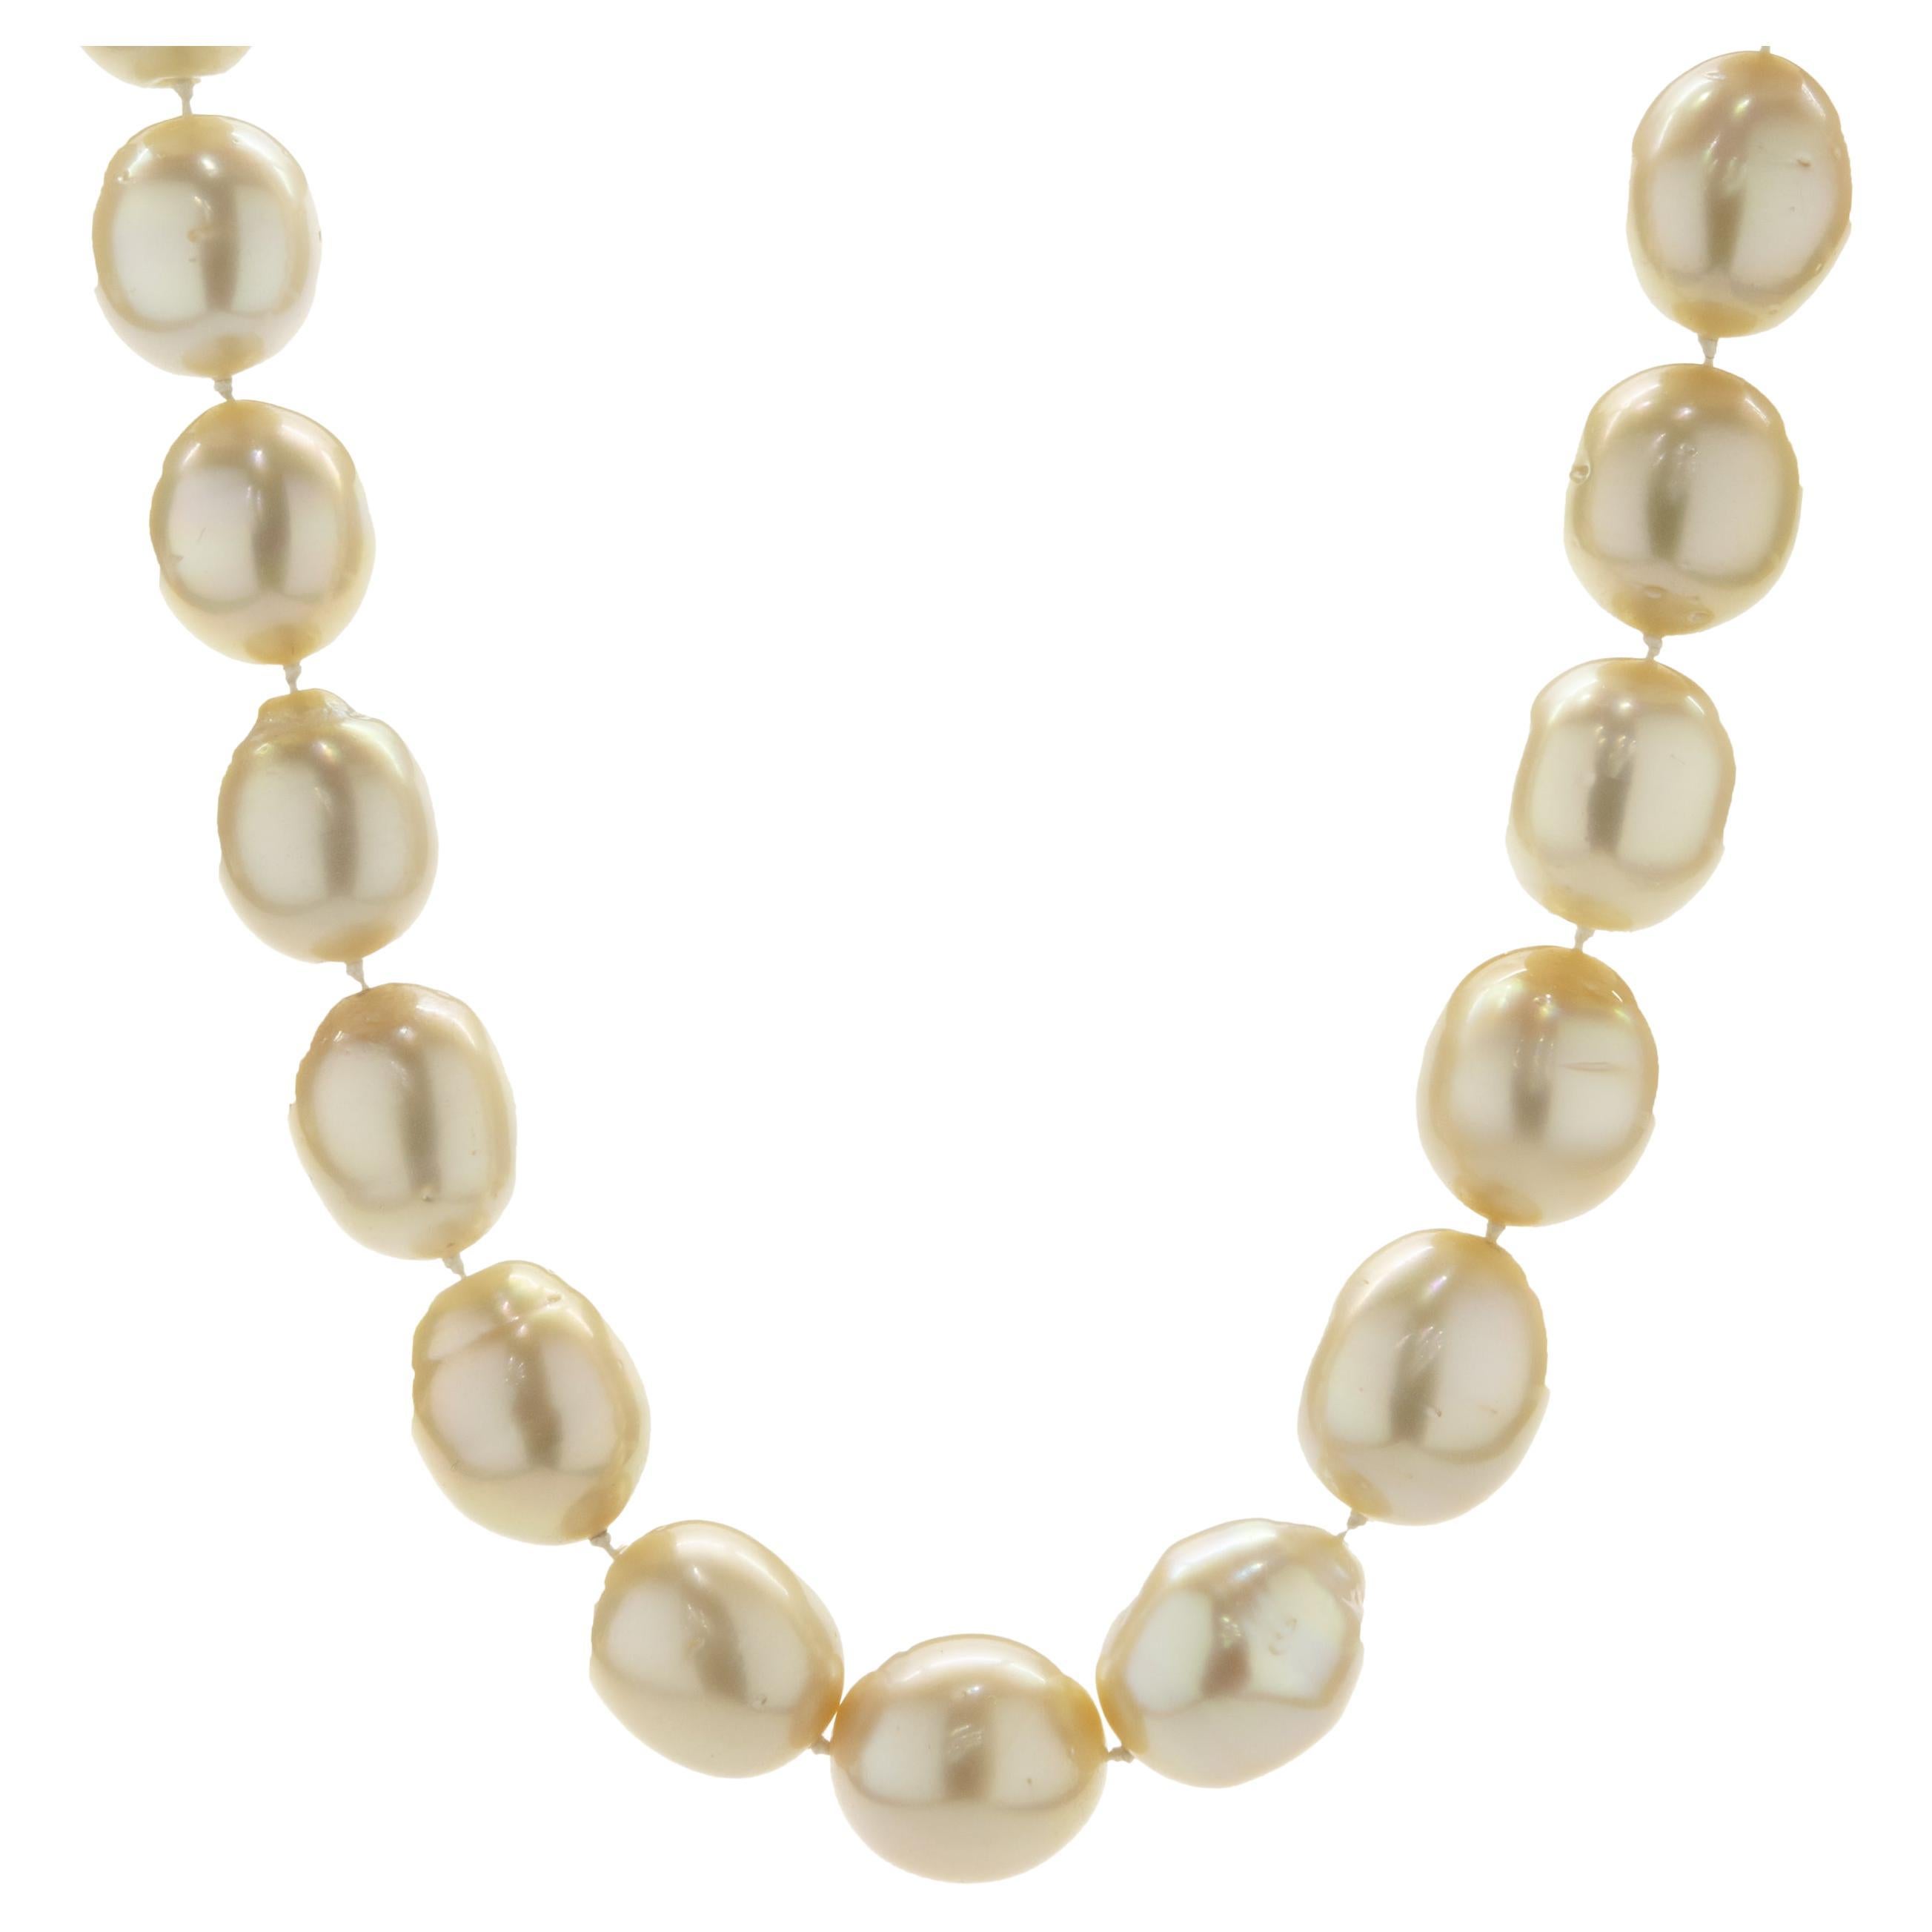 Golden Pearl Necklace with 14 Karat Yellow Gold Ball Clasp For Sale